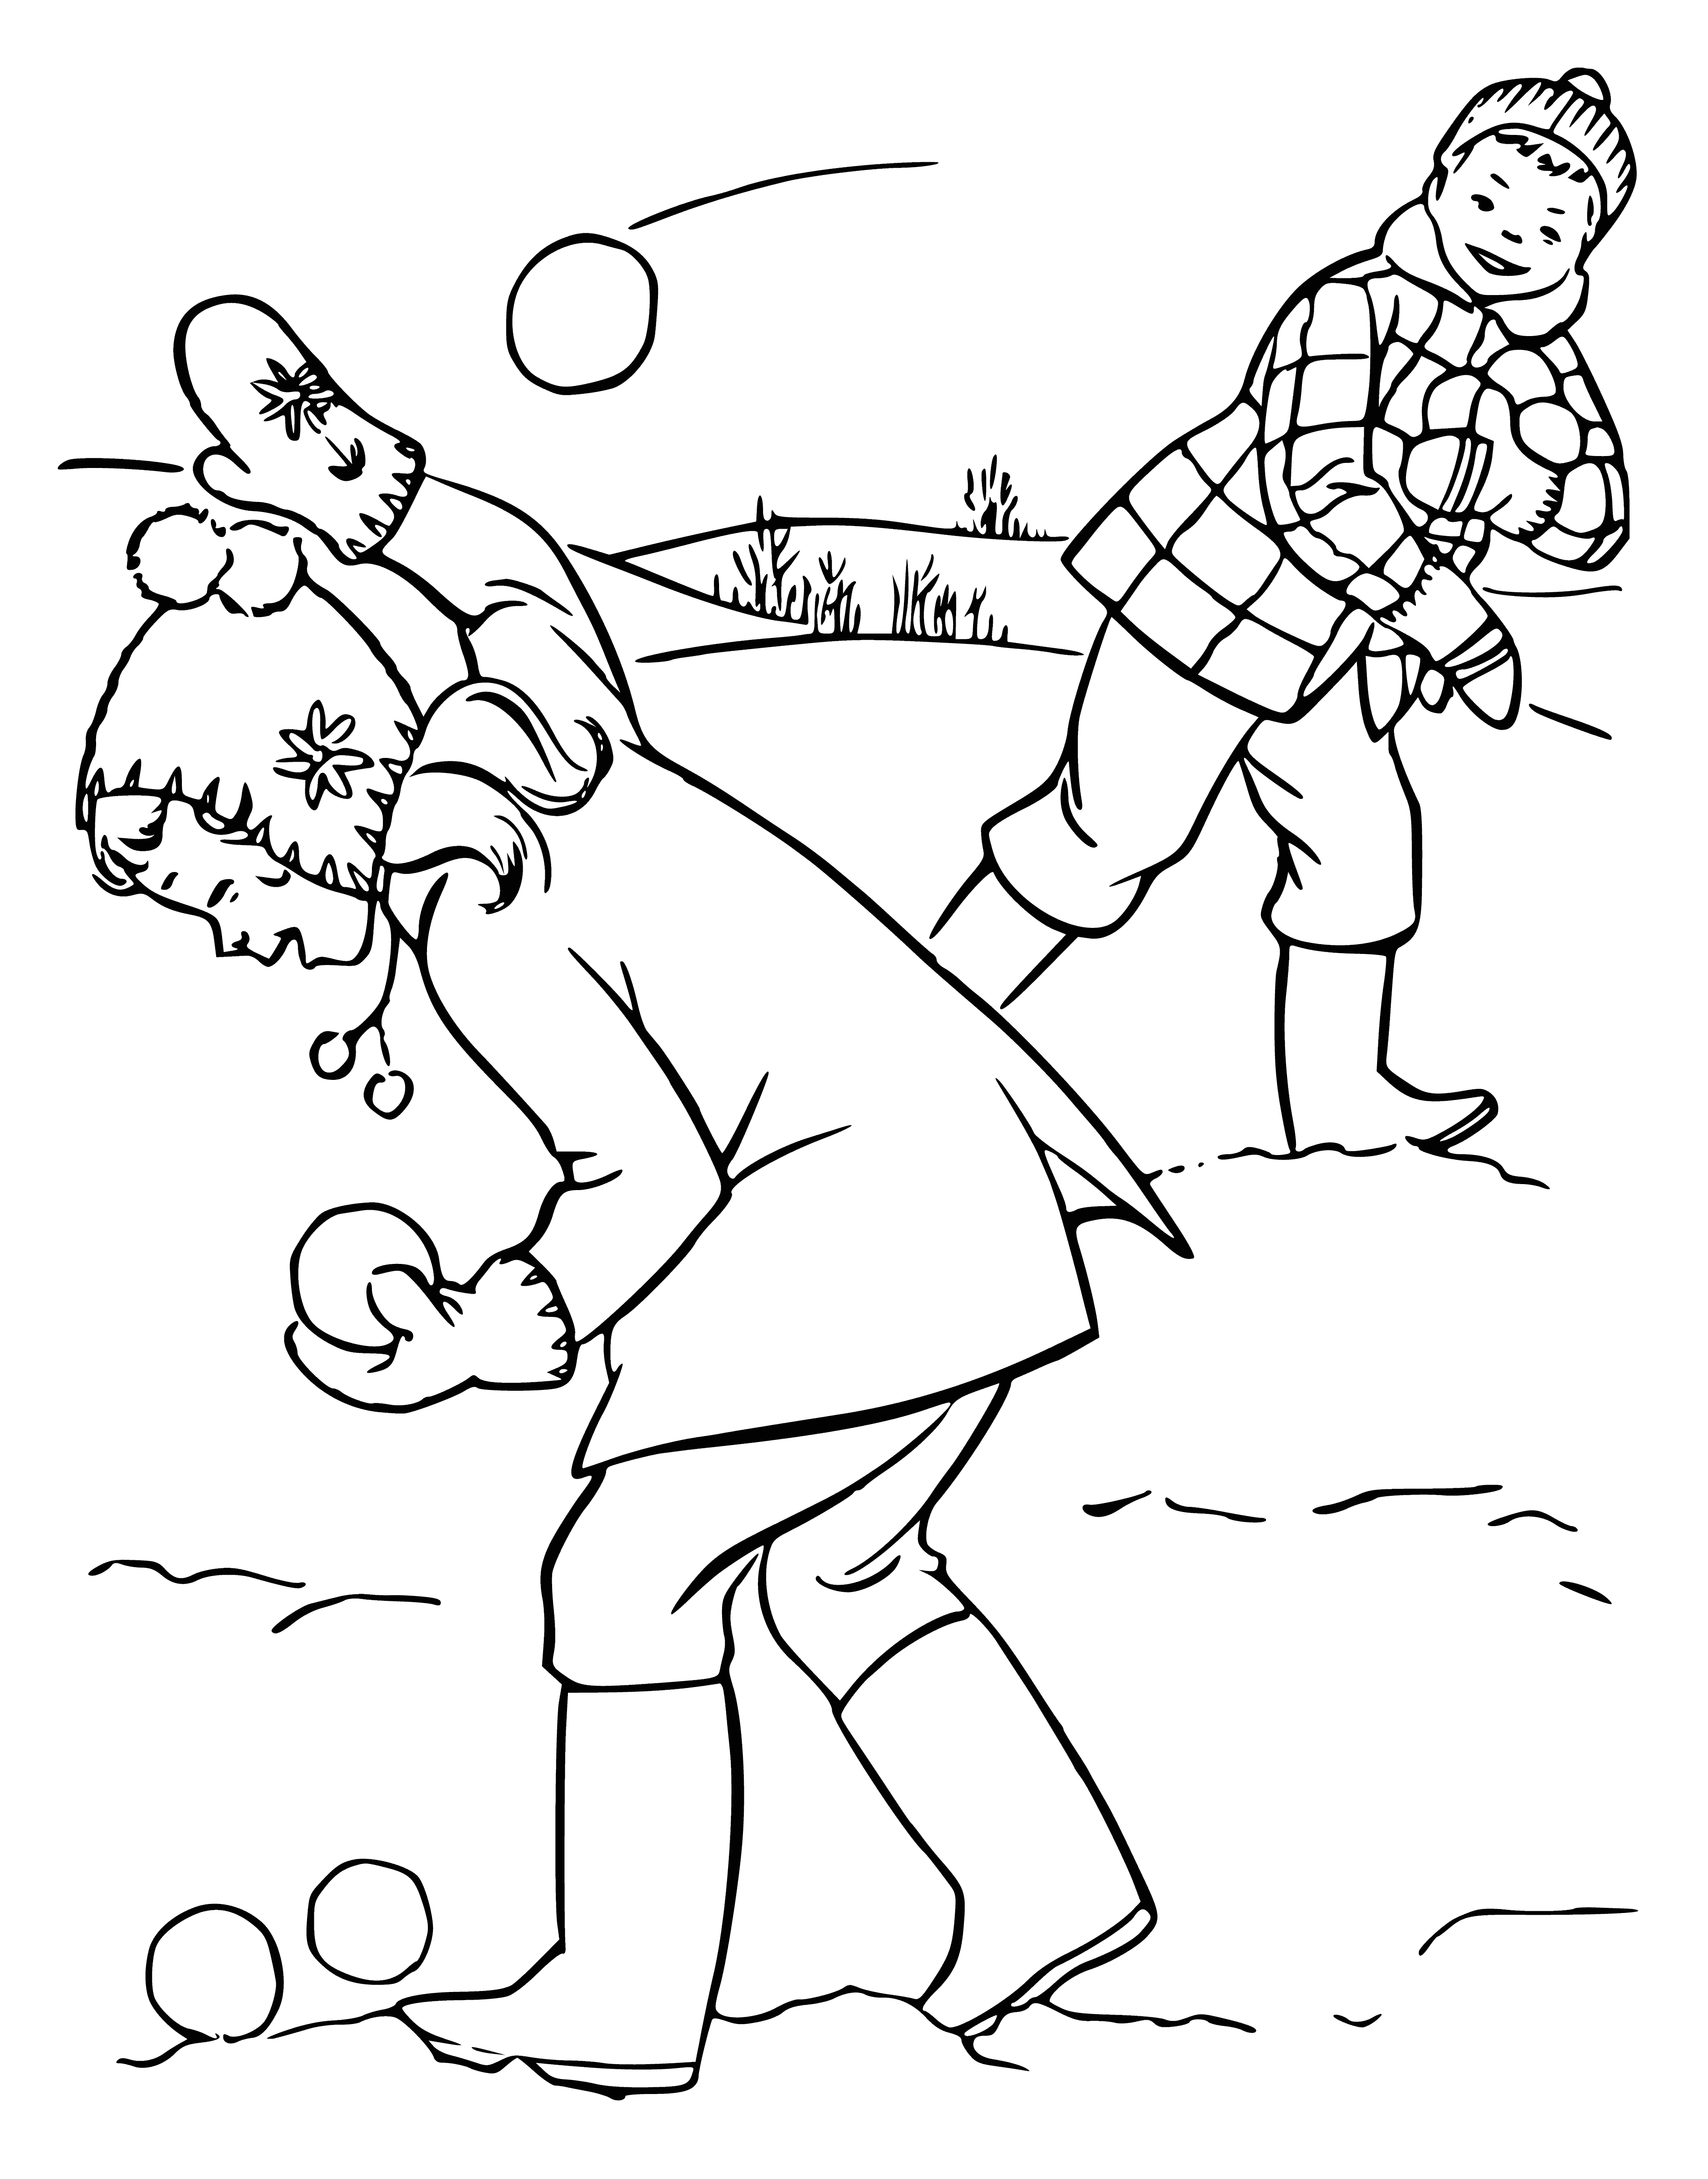 coloring page: Players take turns throwing snowballs at the target, with the winner getting the most in. Colorful snowy scene on a gameboard, fun for all ages!